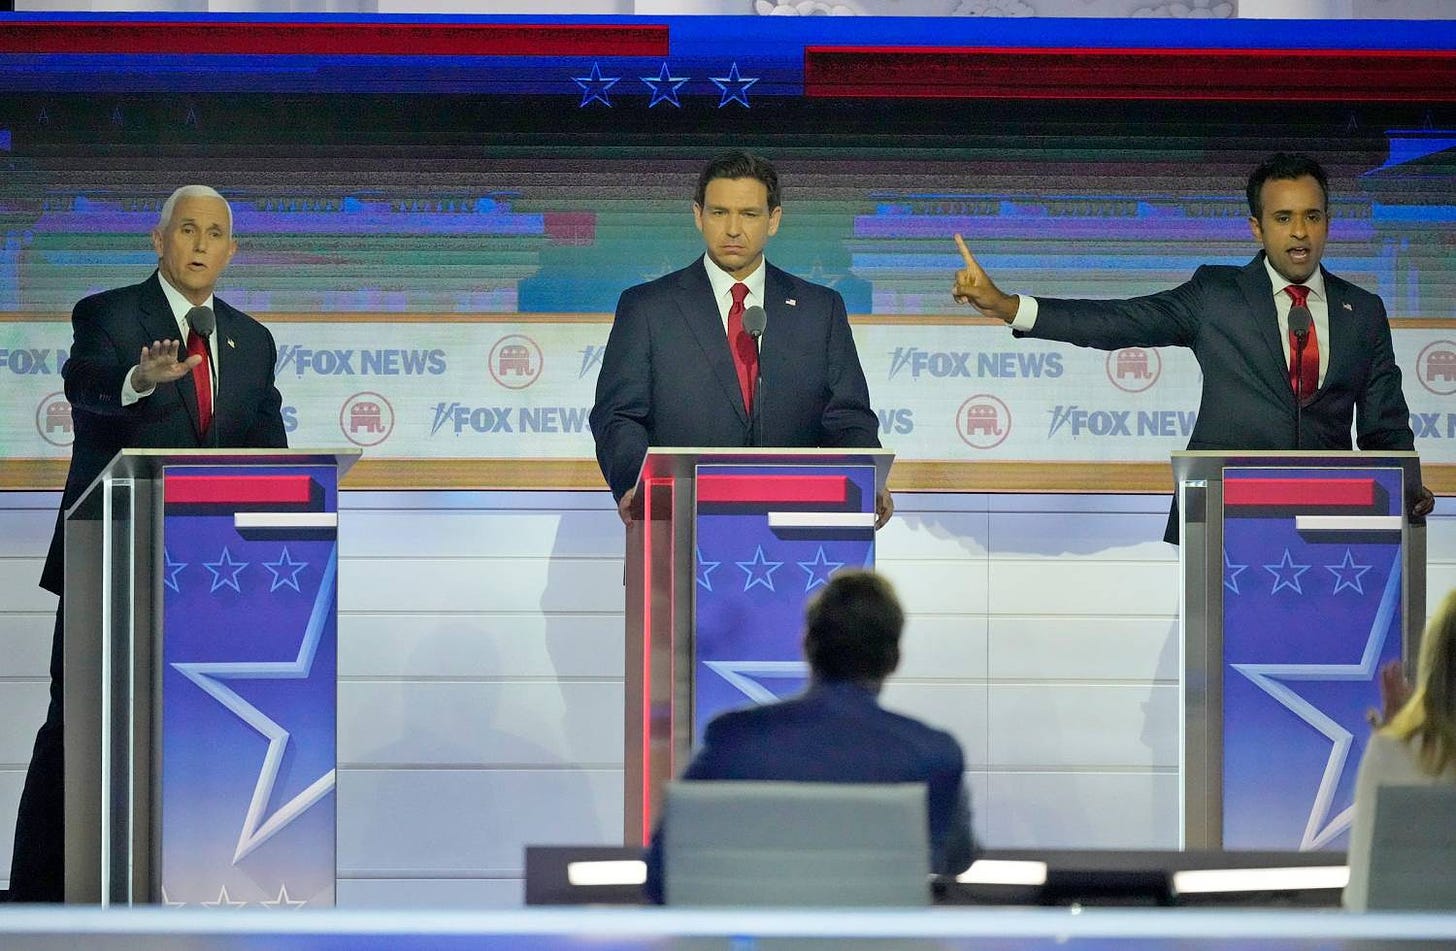 The first Republican debate and Trump's interview were mostly stuck in the  past | Brookings